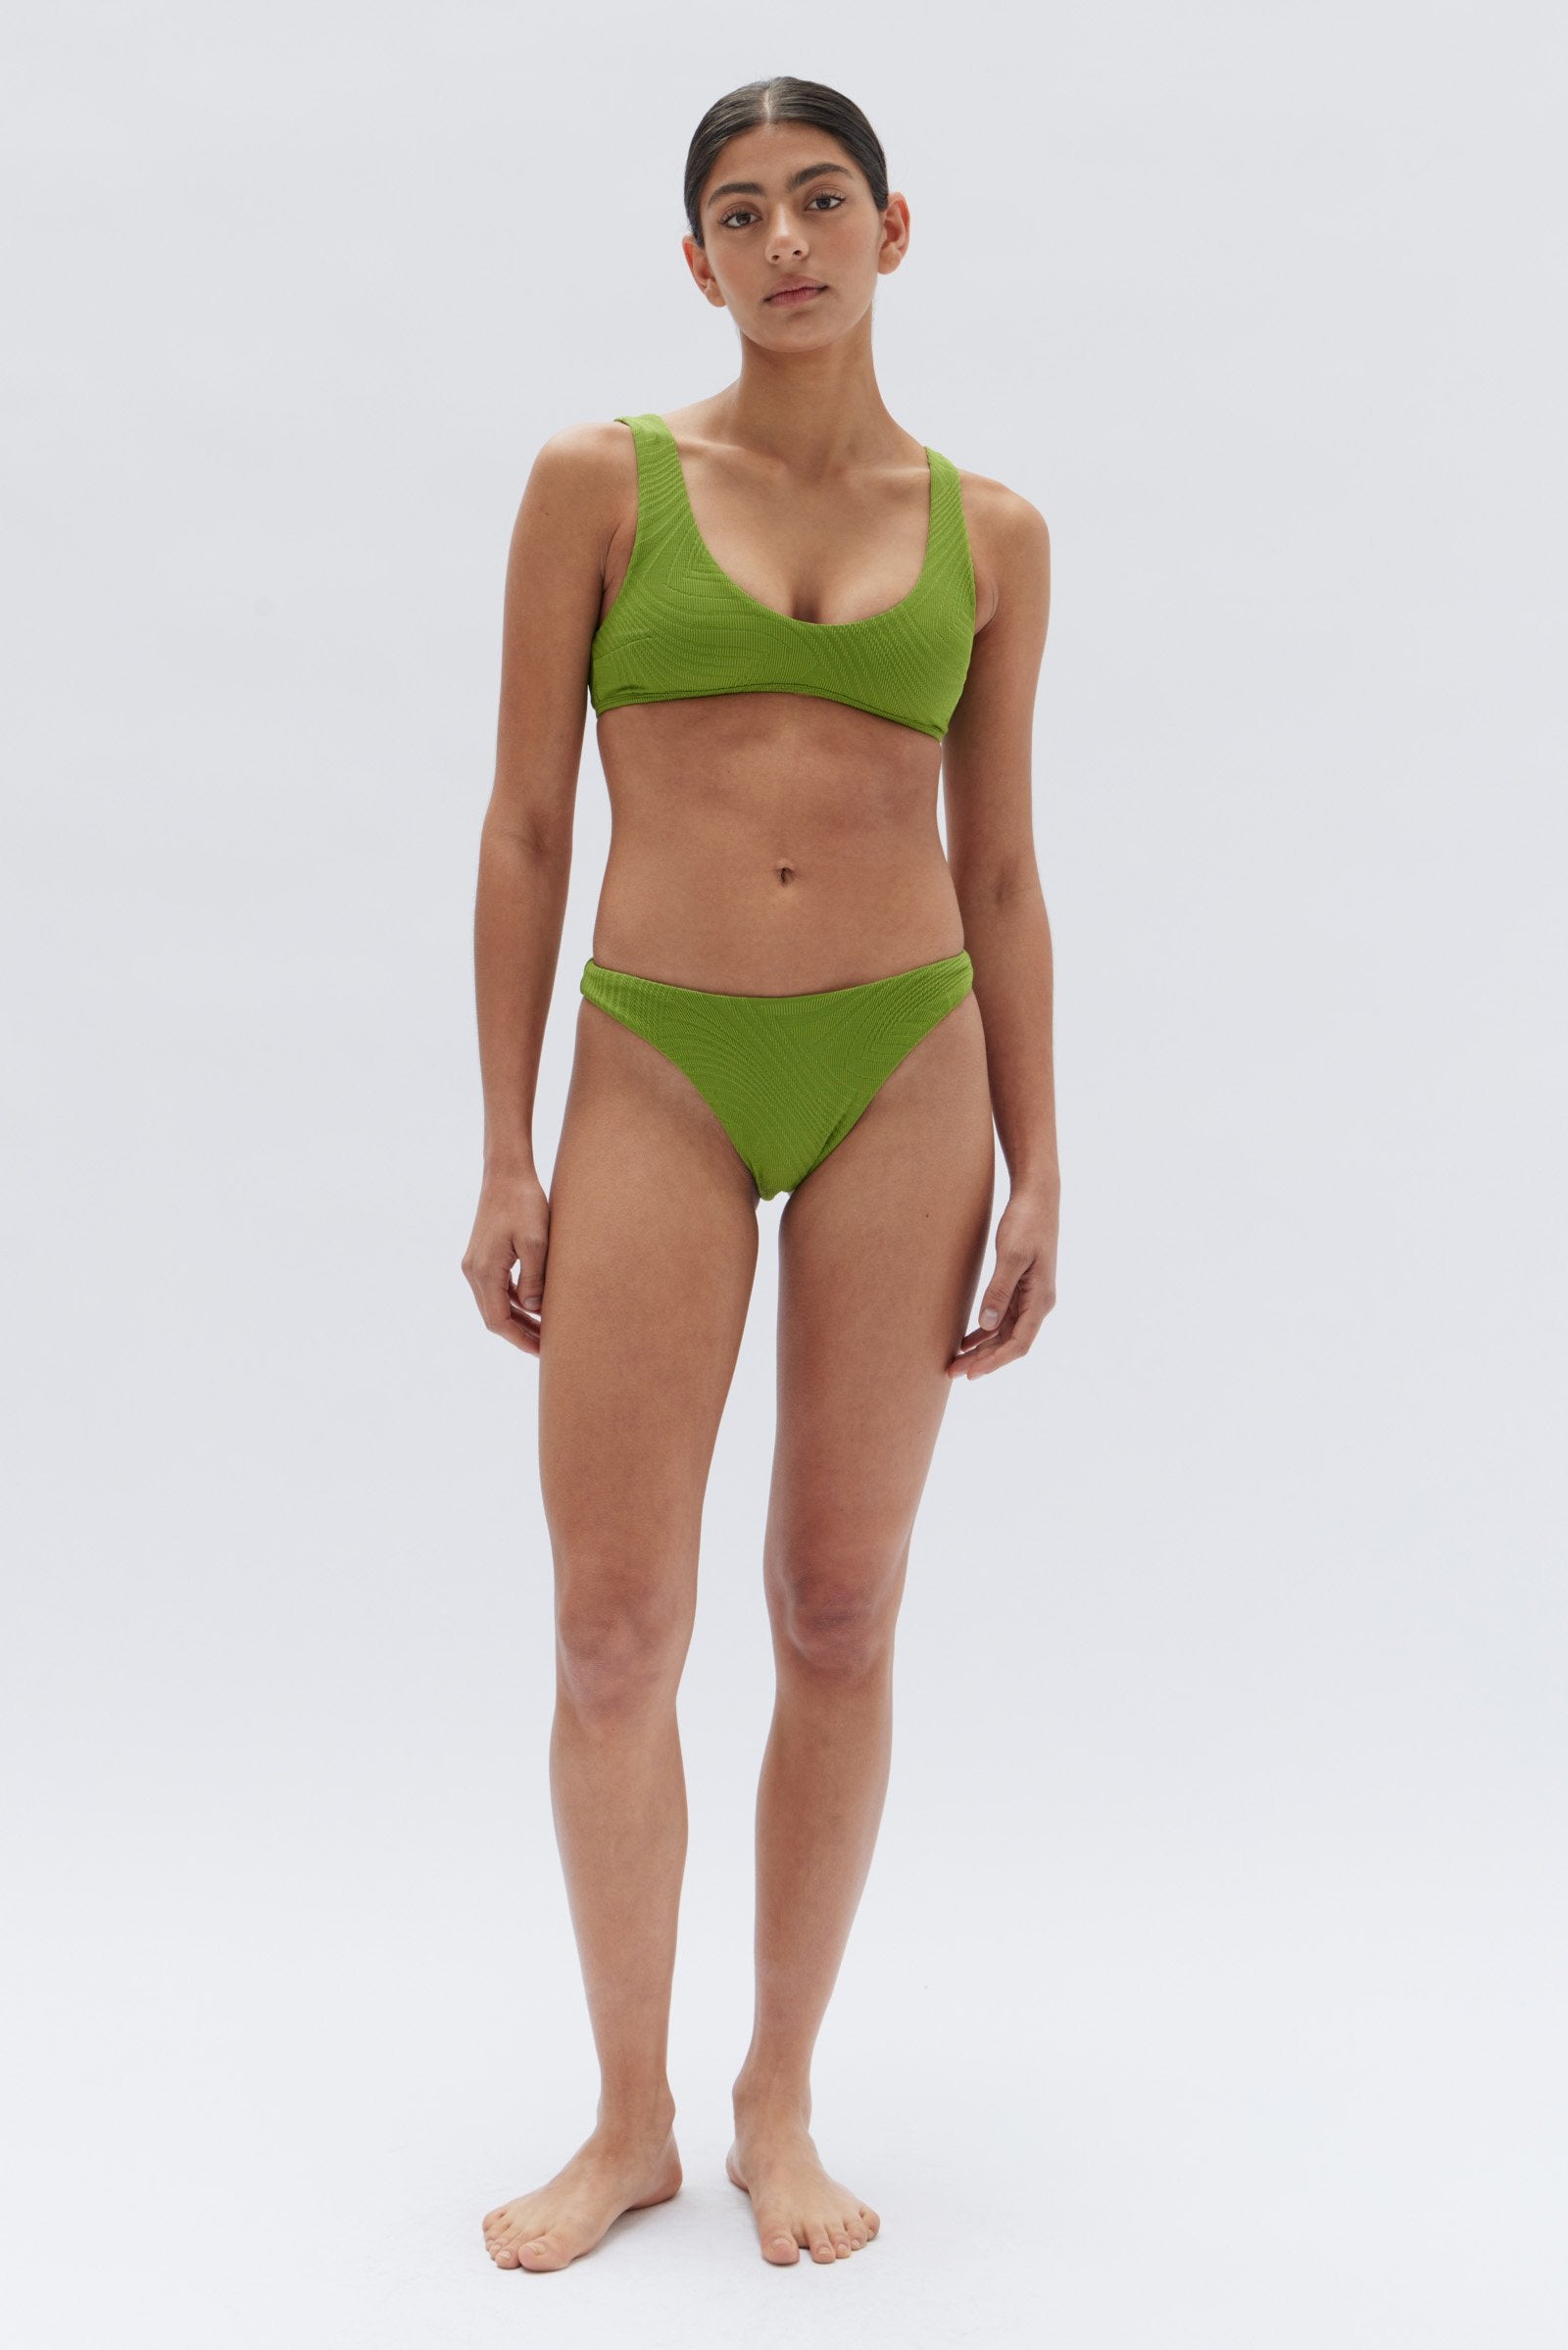 Andie Swim The Tank Bralette / Available in Fern – NA NIN